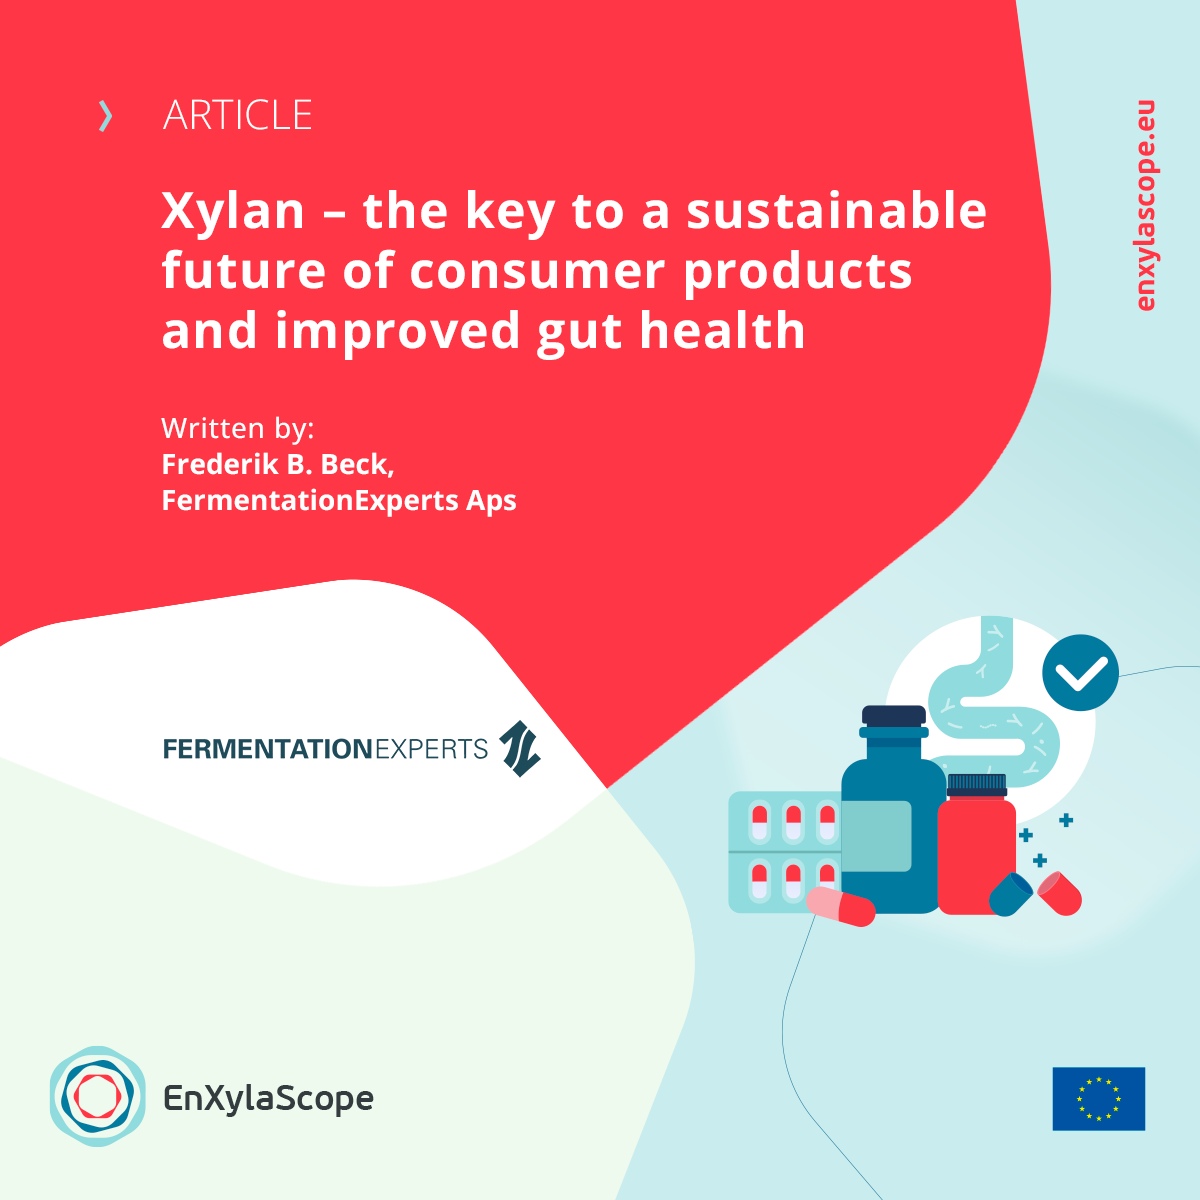 Xylan – the key to a sustainable future of consumer products and improved gut health